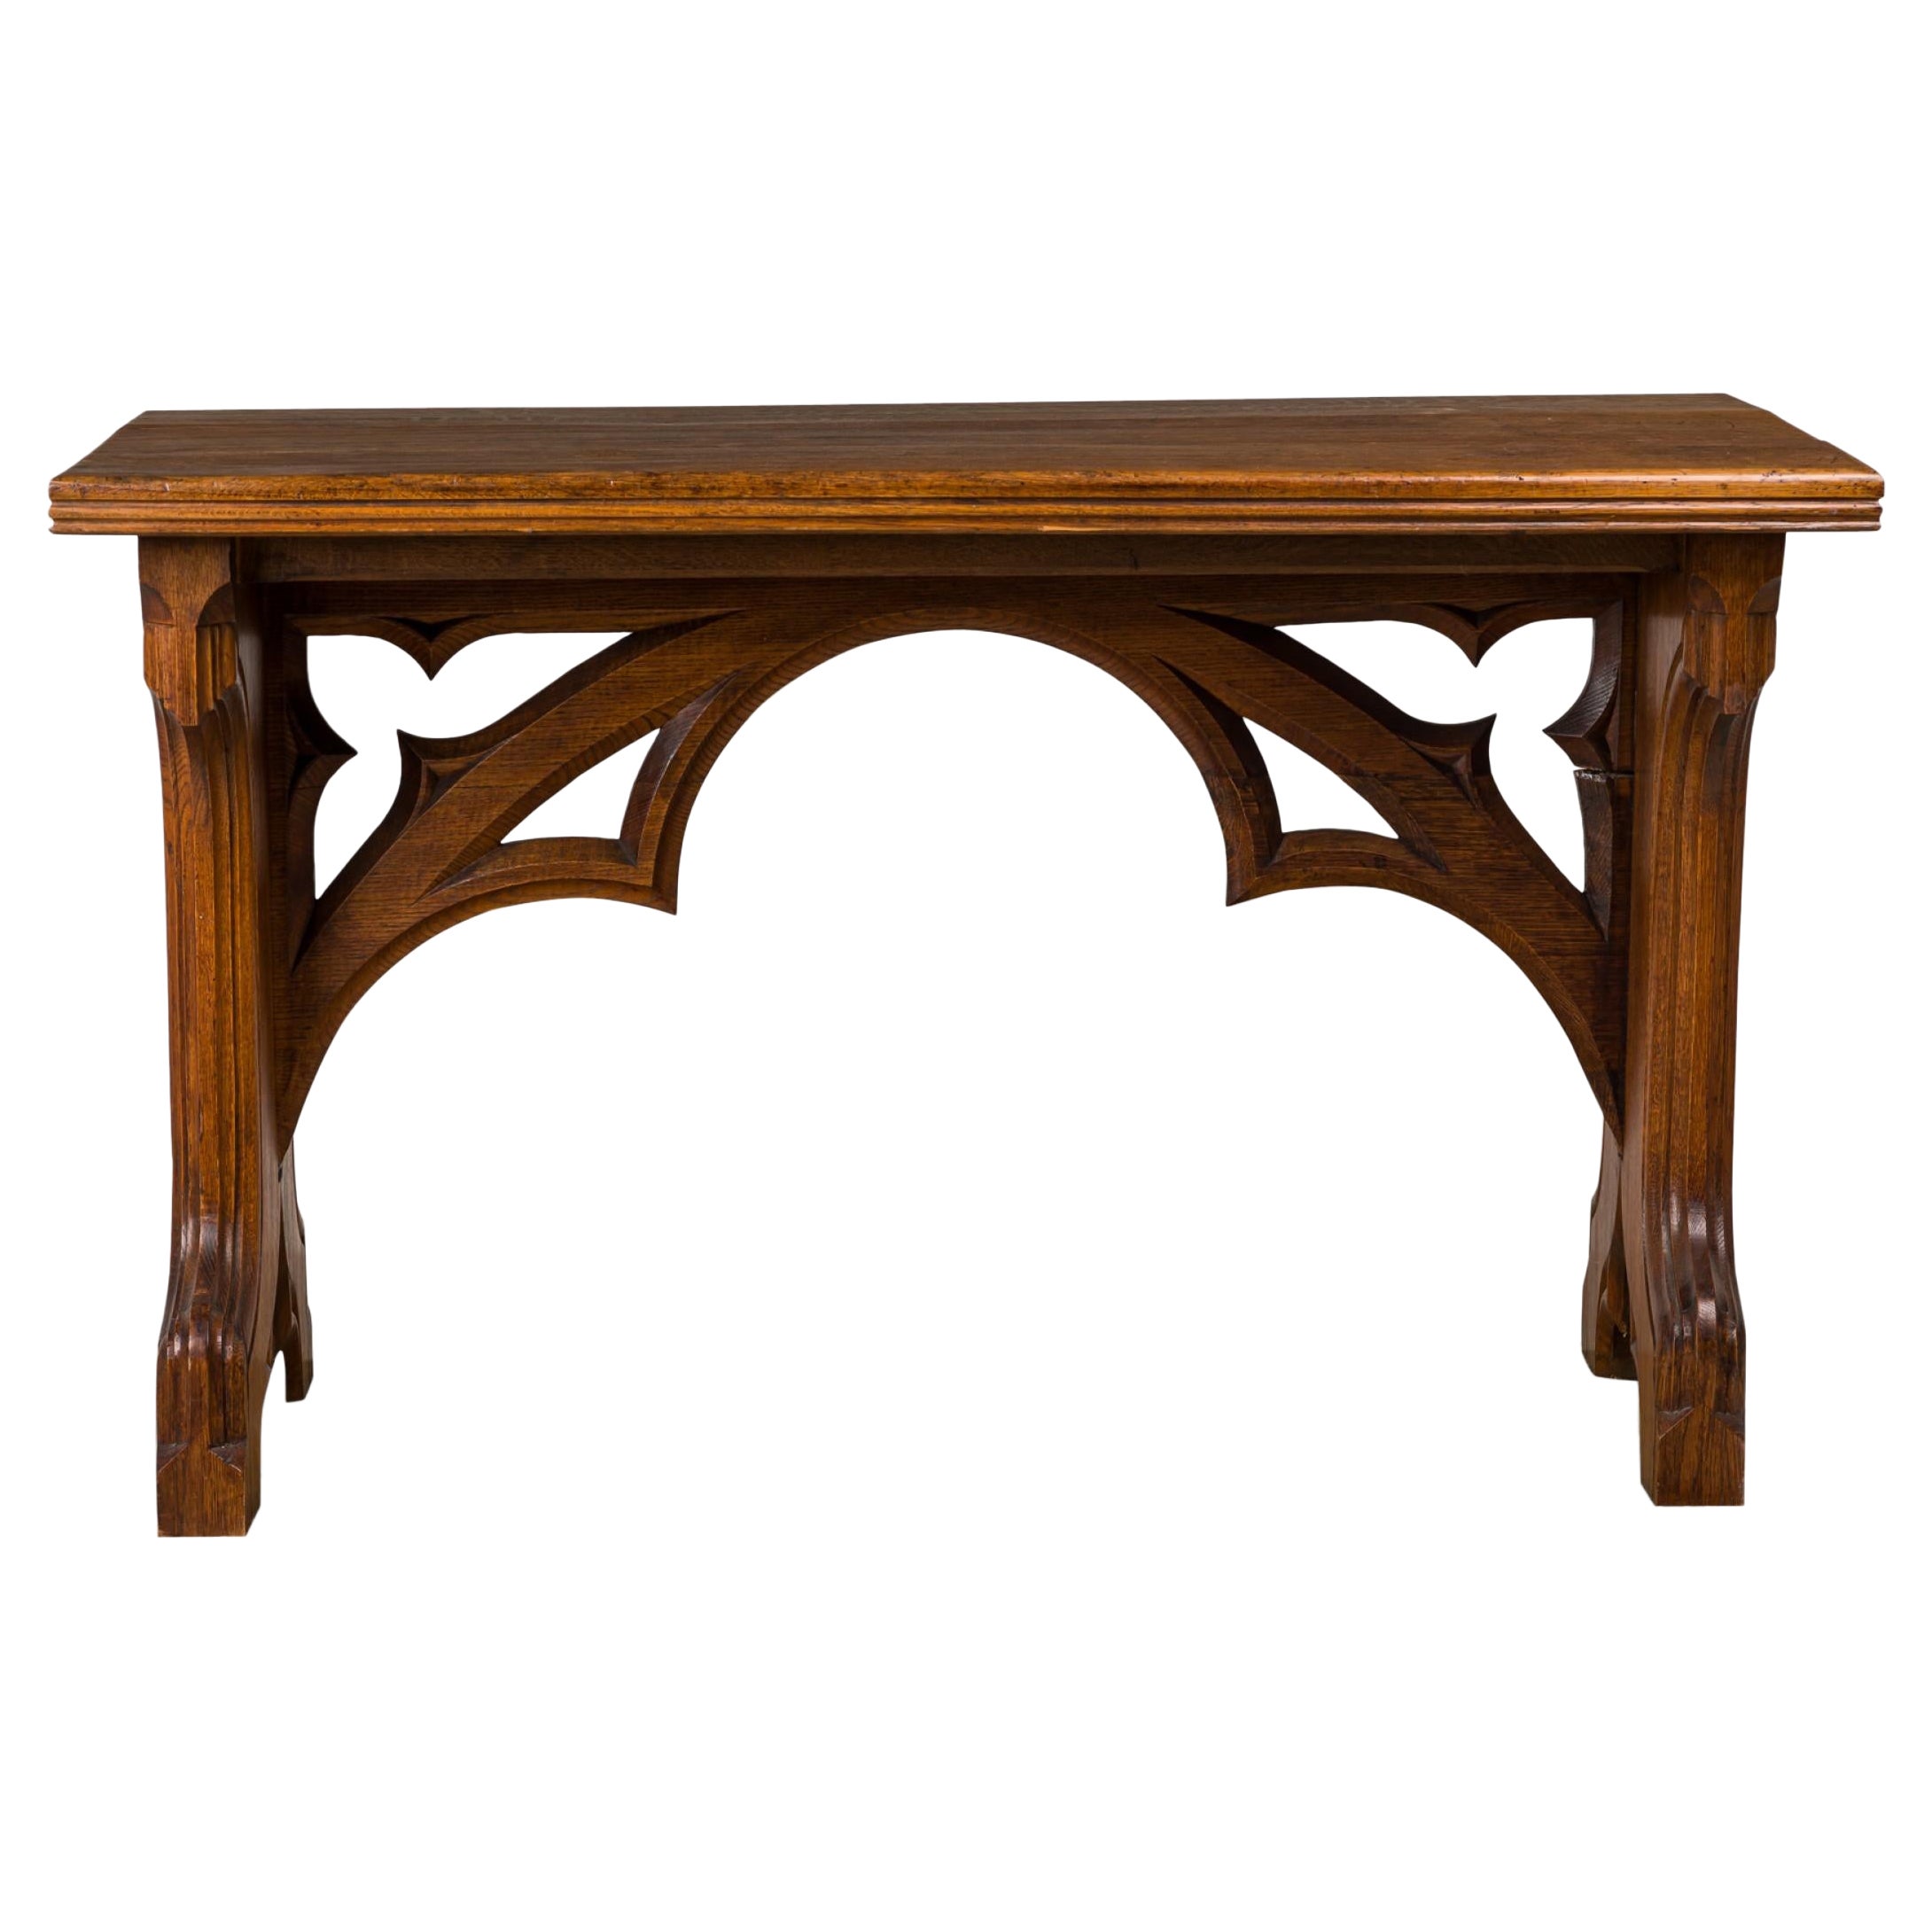 English Victorian Gothic Revival Carved Oak Table For Sale